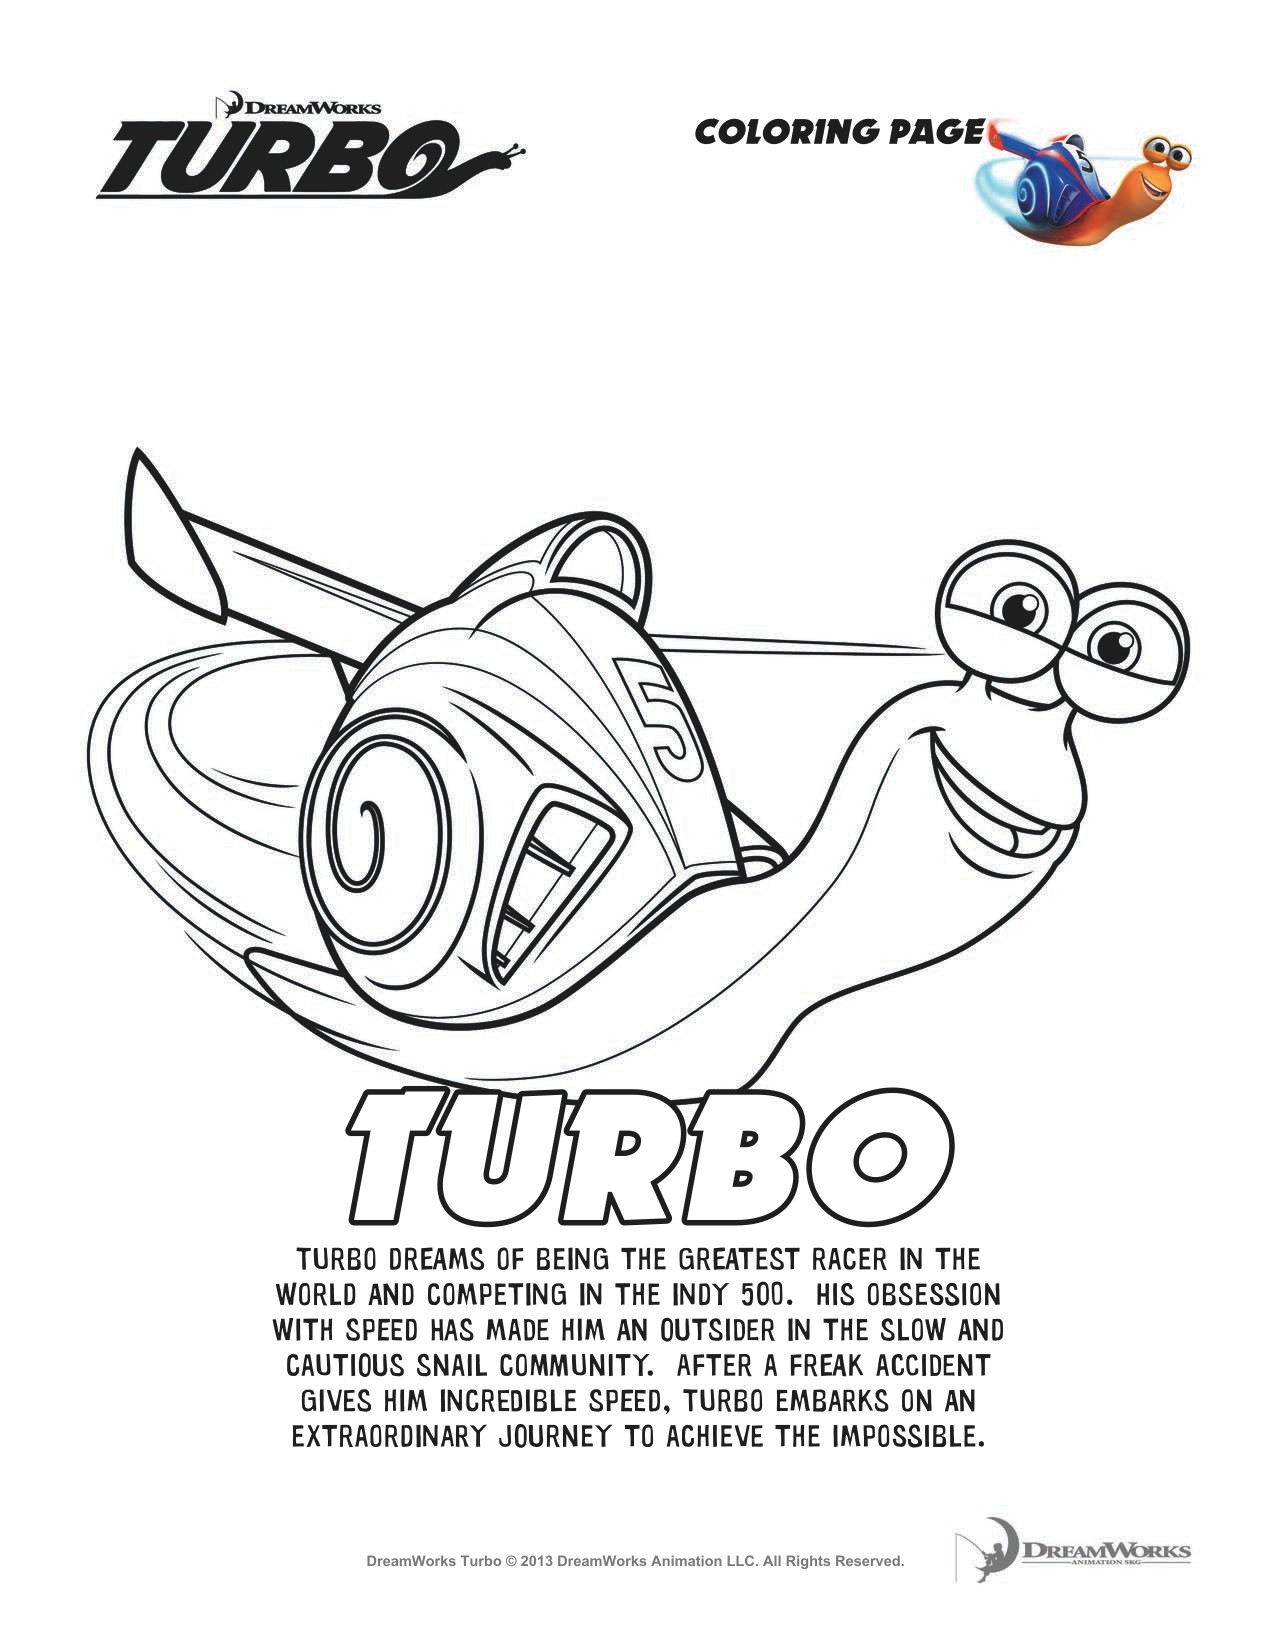 Turbo Coloring Pages
 DreamWorks Turbo Coloring Pages & More TurboFastFun She